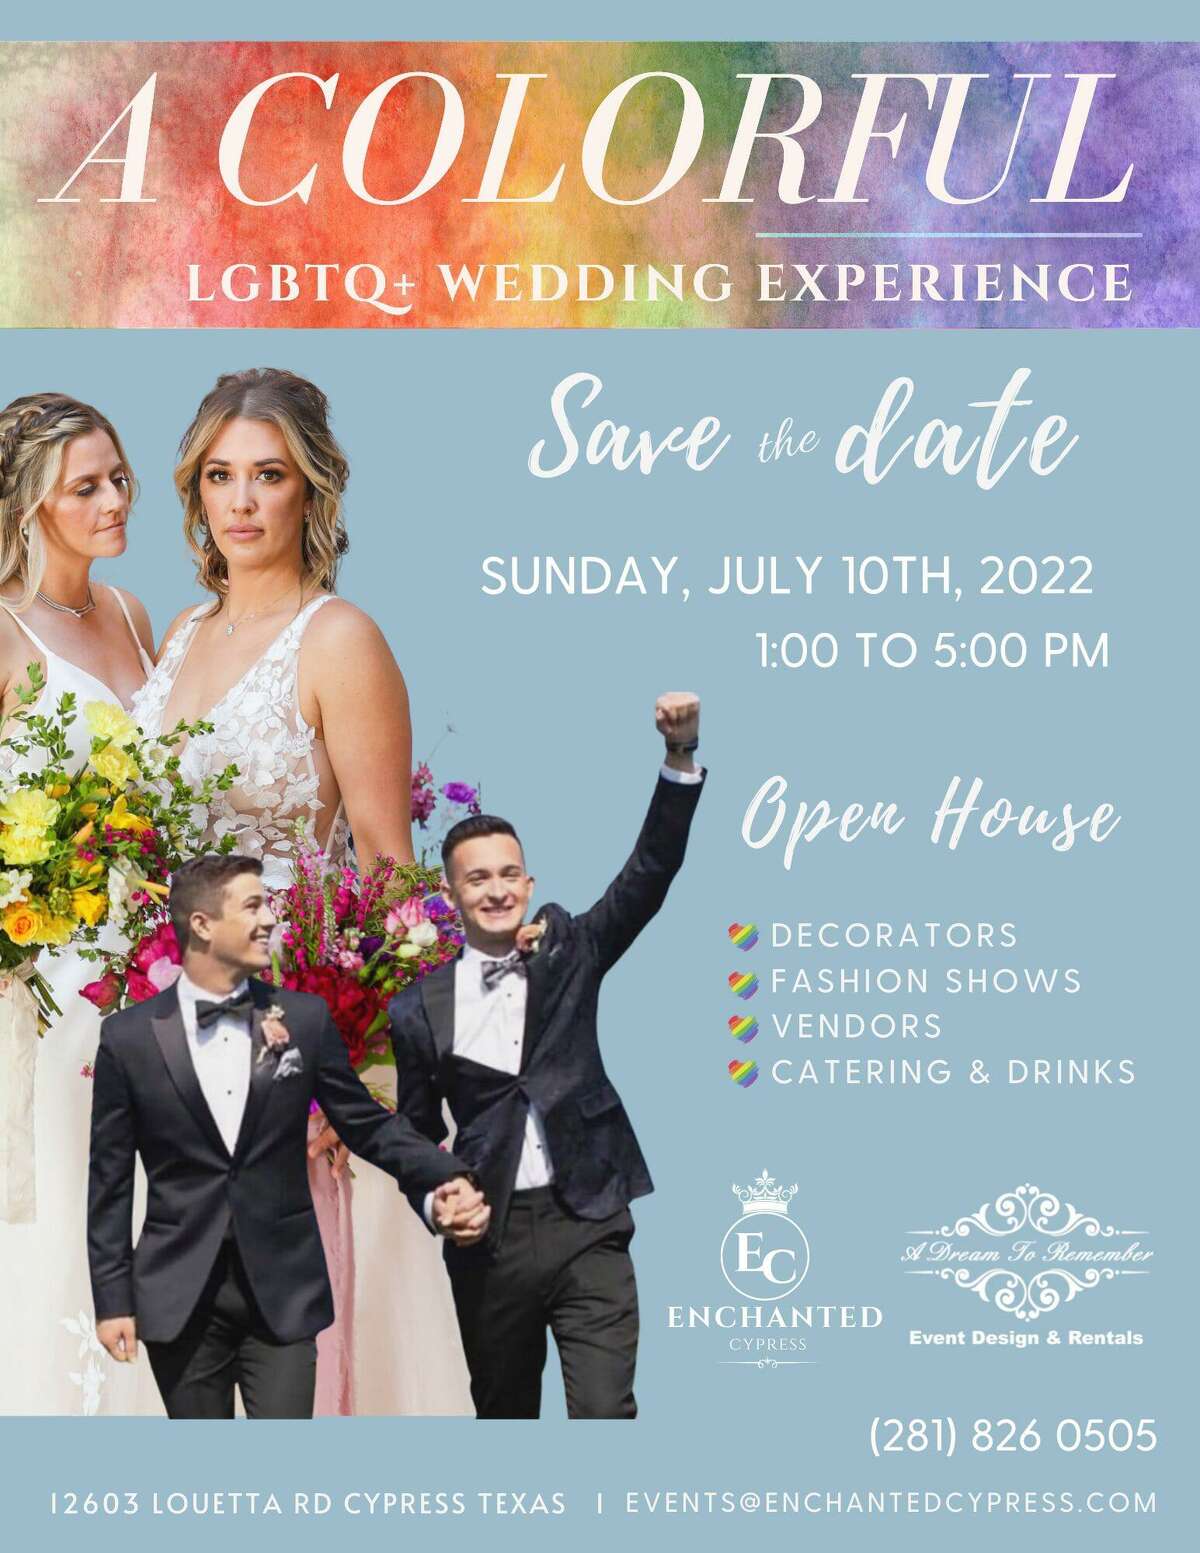 A Colorful LGBTQ+ Wedding Experience brings business owned by allies and members of the gay community, allowing LGBTQ+ couples to plan for their wedding in a safe environment at Enchanted Cypress.